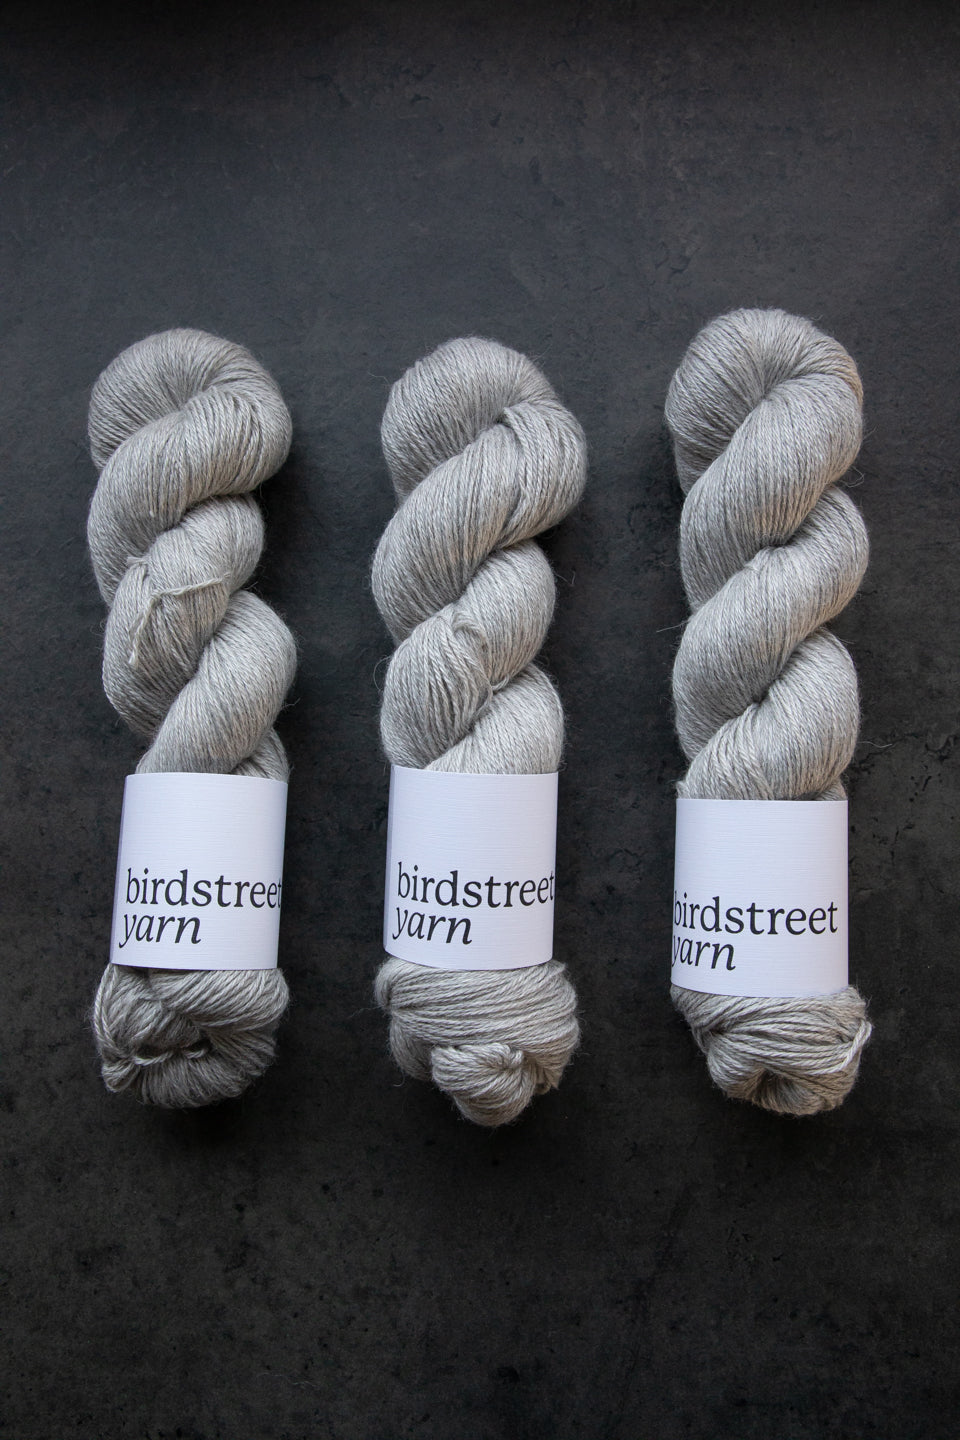 Bare Naked: 4ply light grey baby alpaca, silk and cashmere